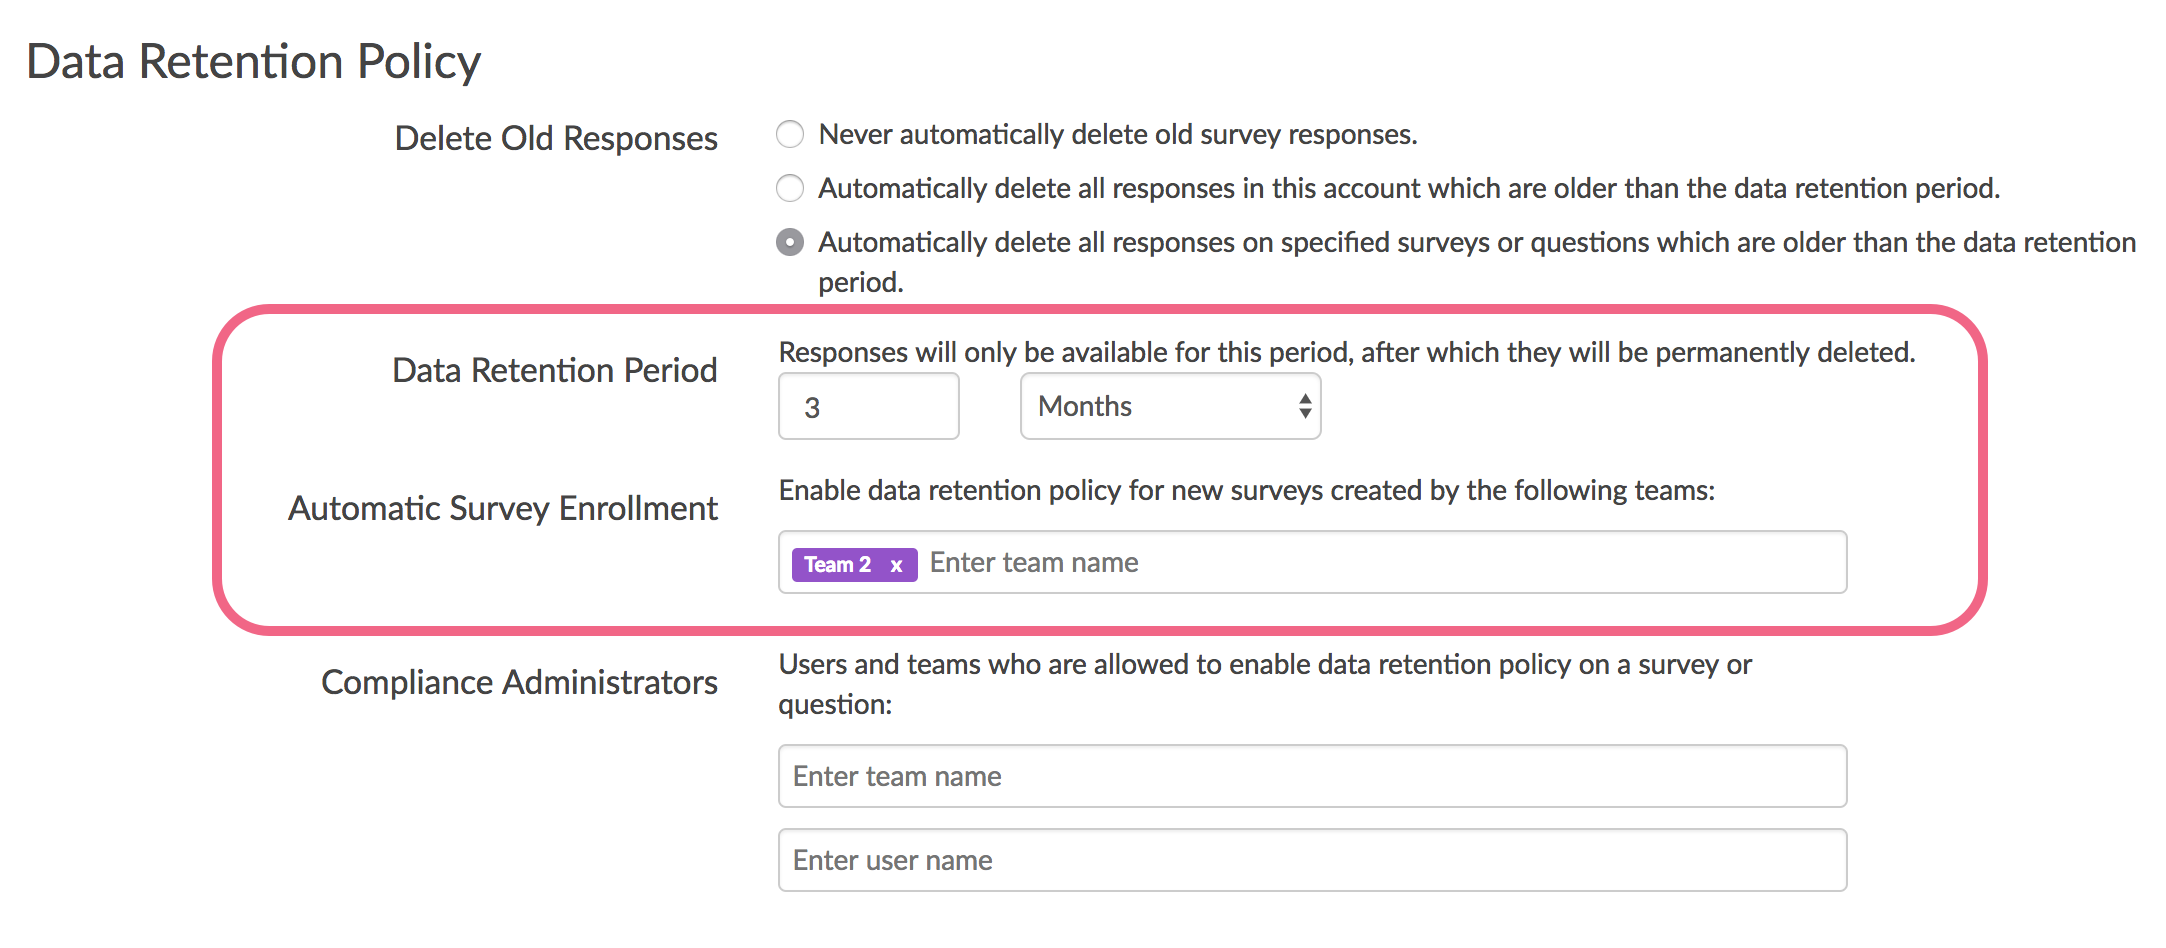 DRP Setting: Automatically delete responses on specified surveys